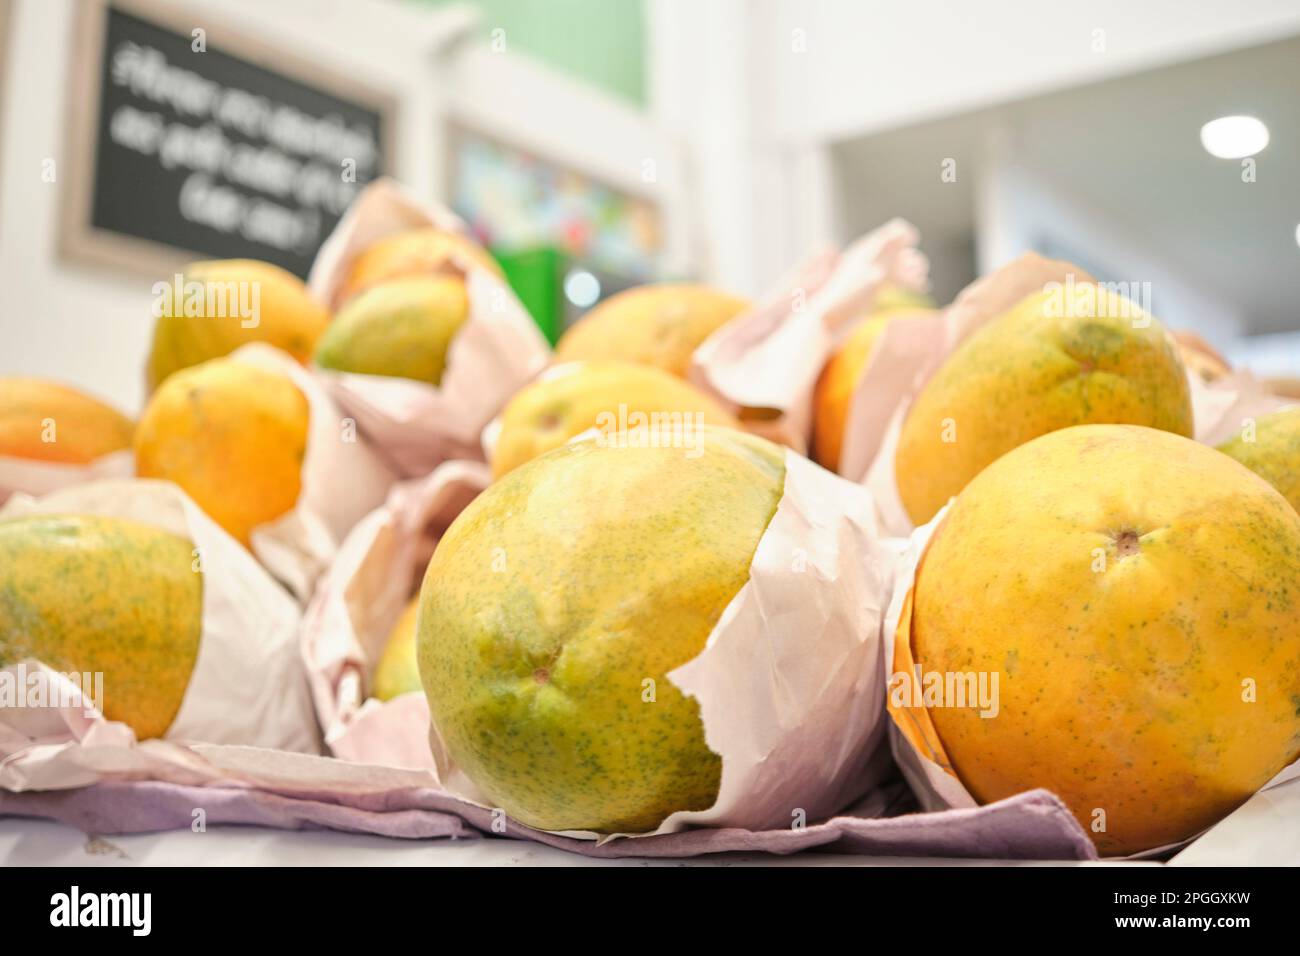 Ripe papayas for sale at a fruit and vegetable market stall. Stock Photo